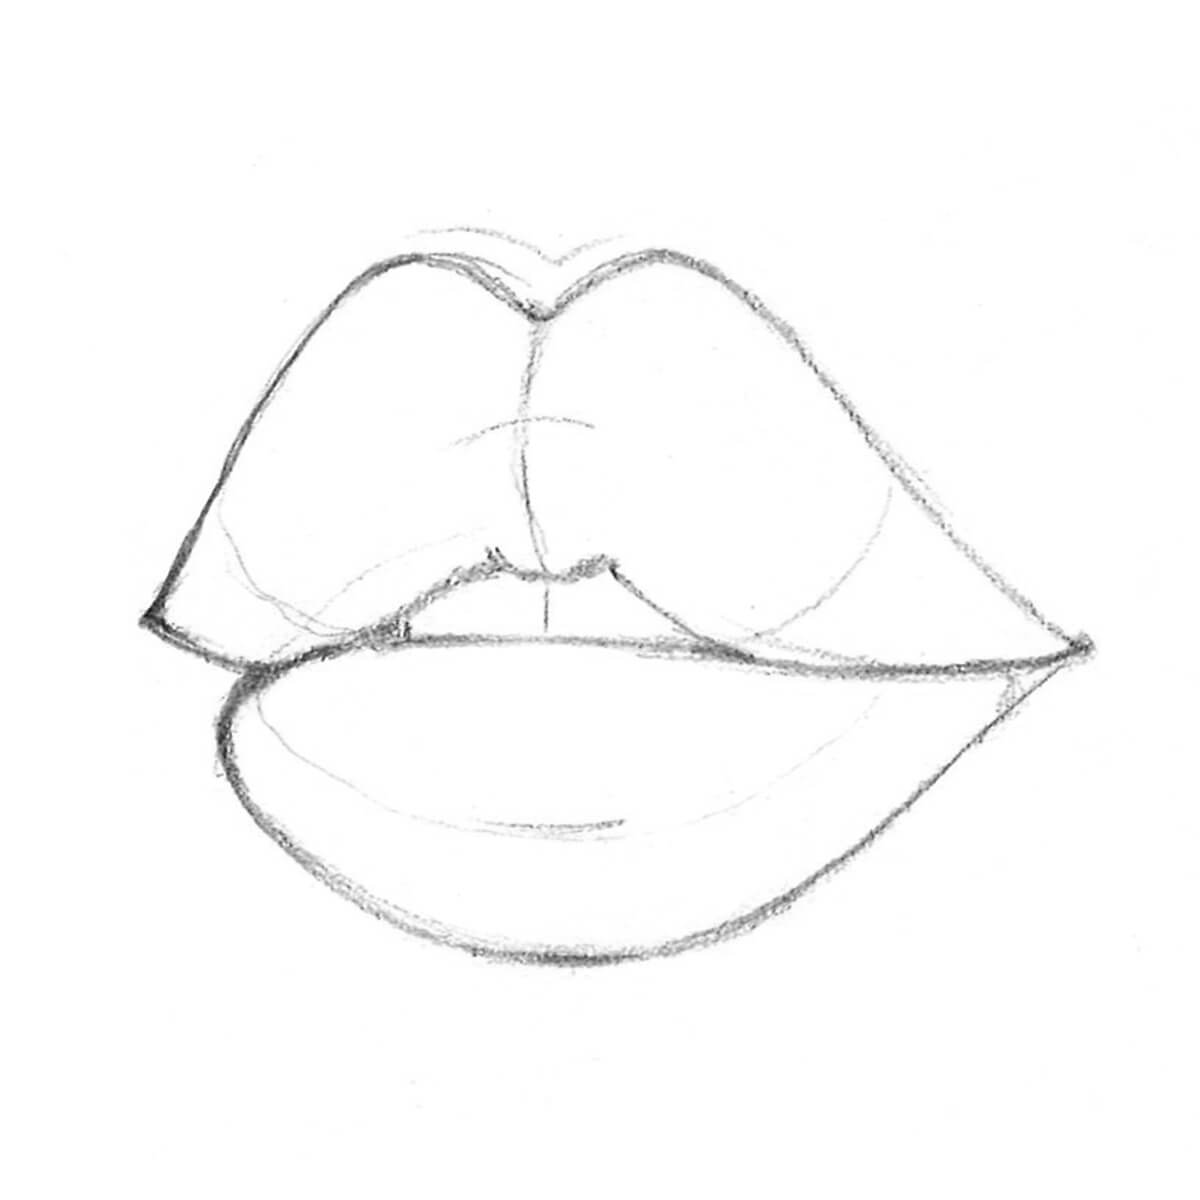 How to draw Lips - Step 4